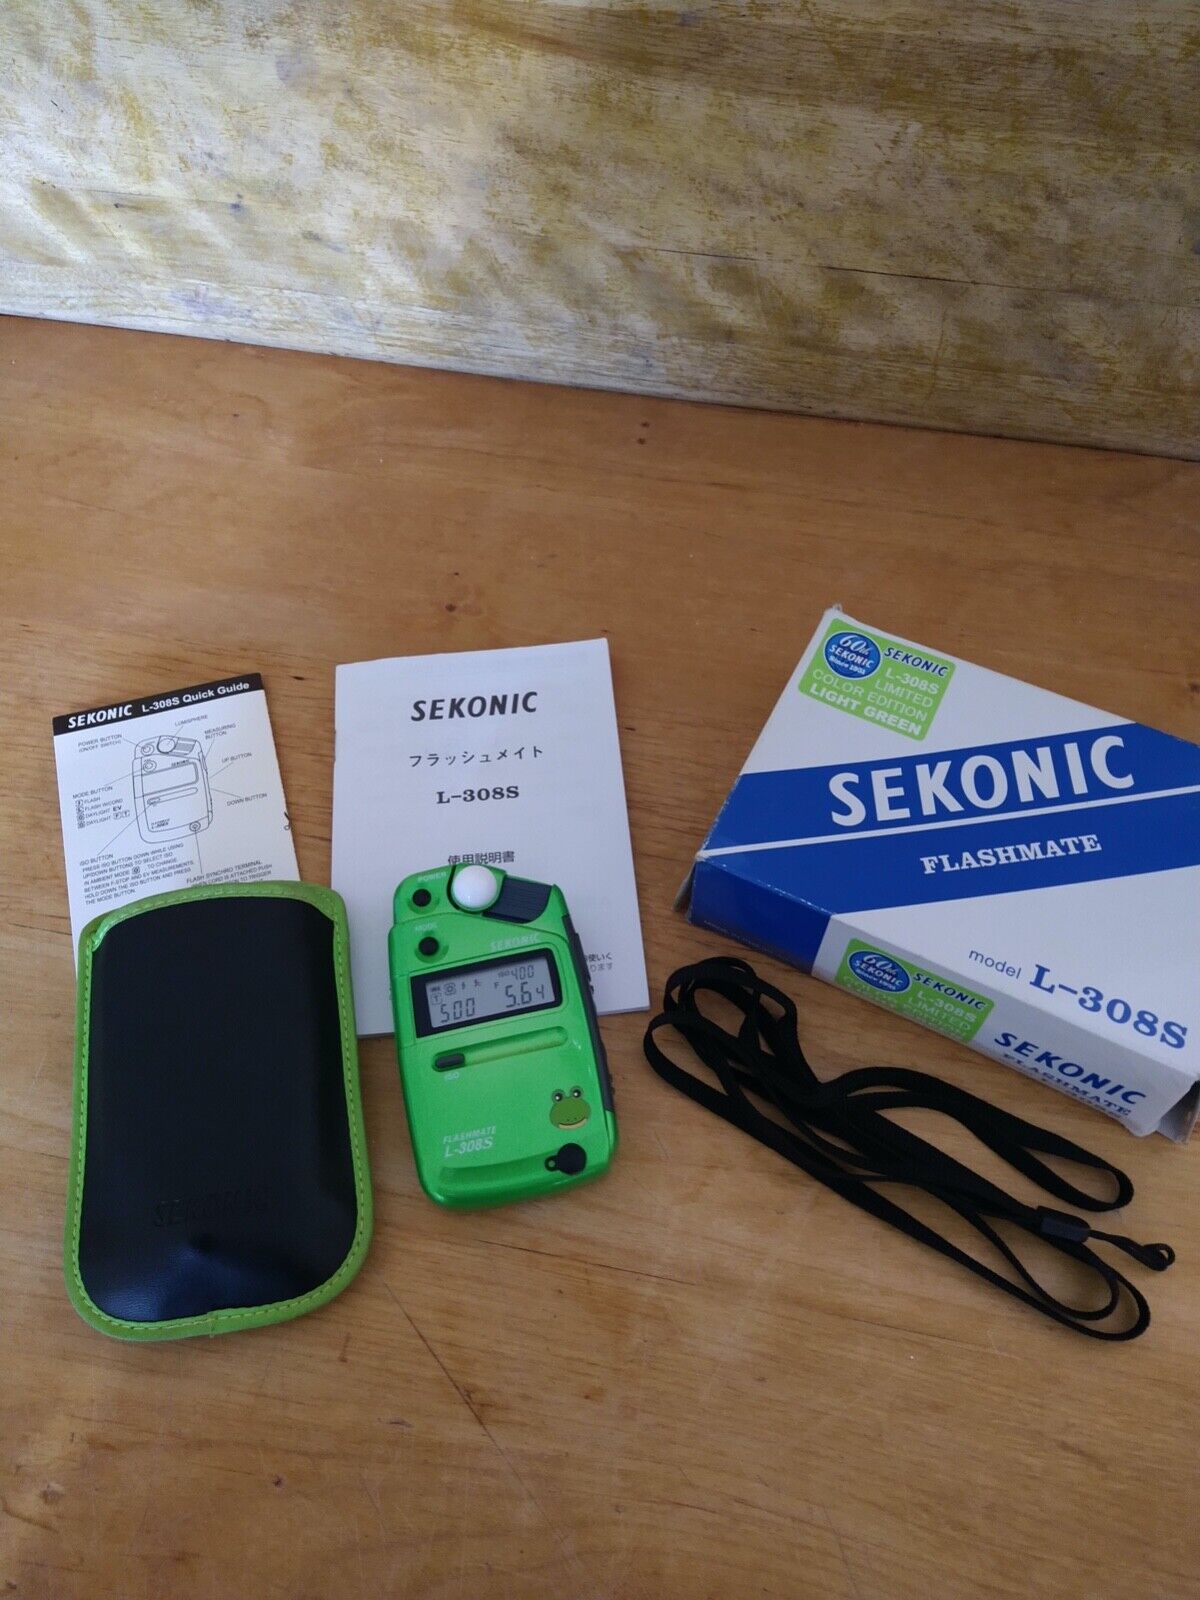 Sekonic L-308s Flashmate Green 60th Anniversary Limited Edition Light Meter